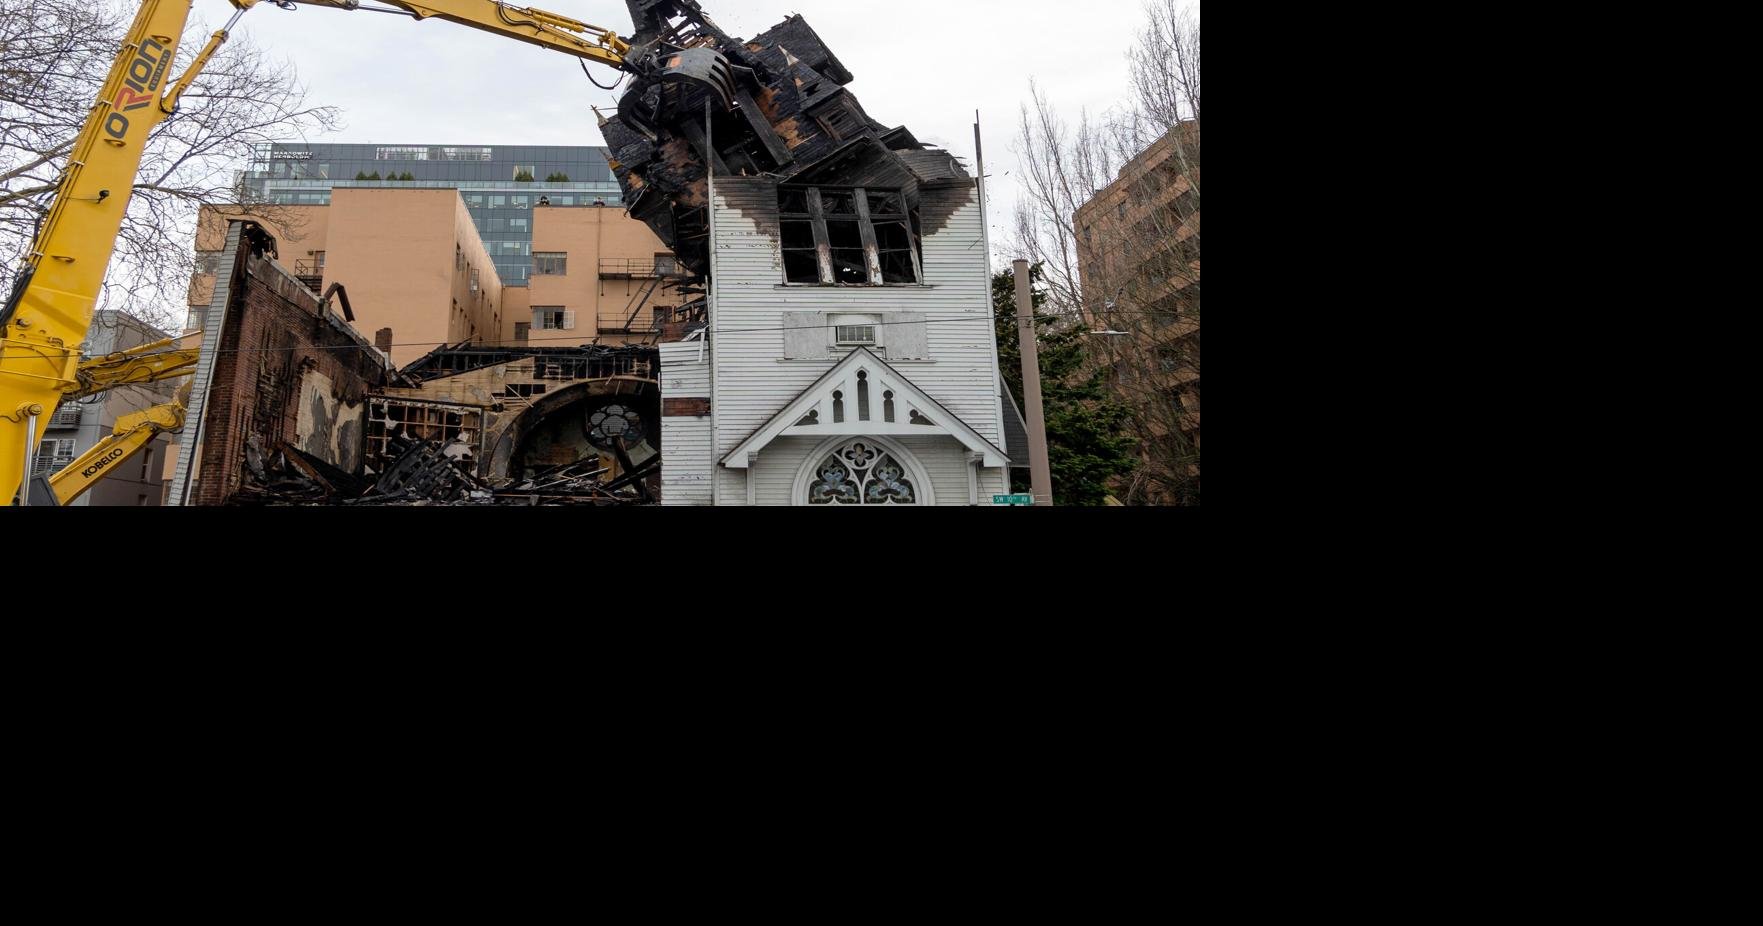 Portlanders gather to watch demolition of burnt-out Korean church | News |  